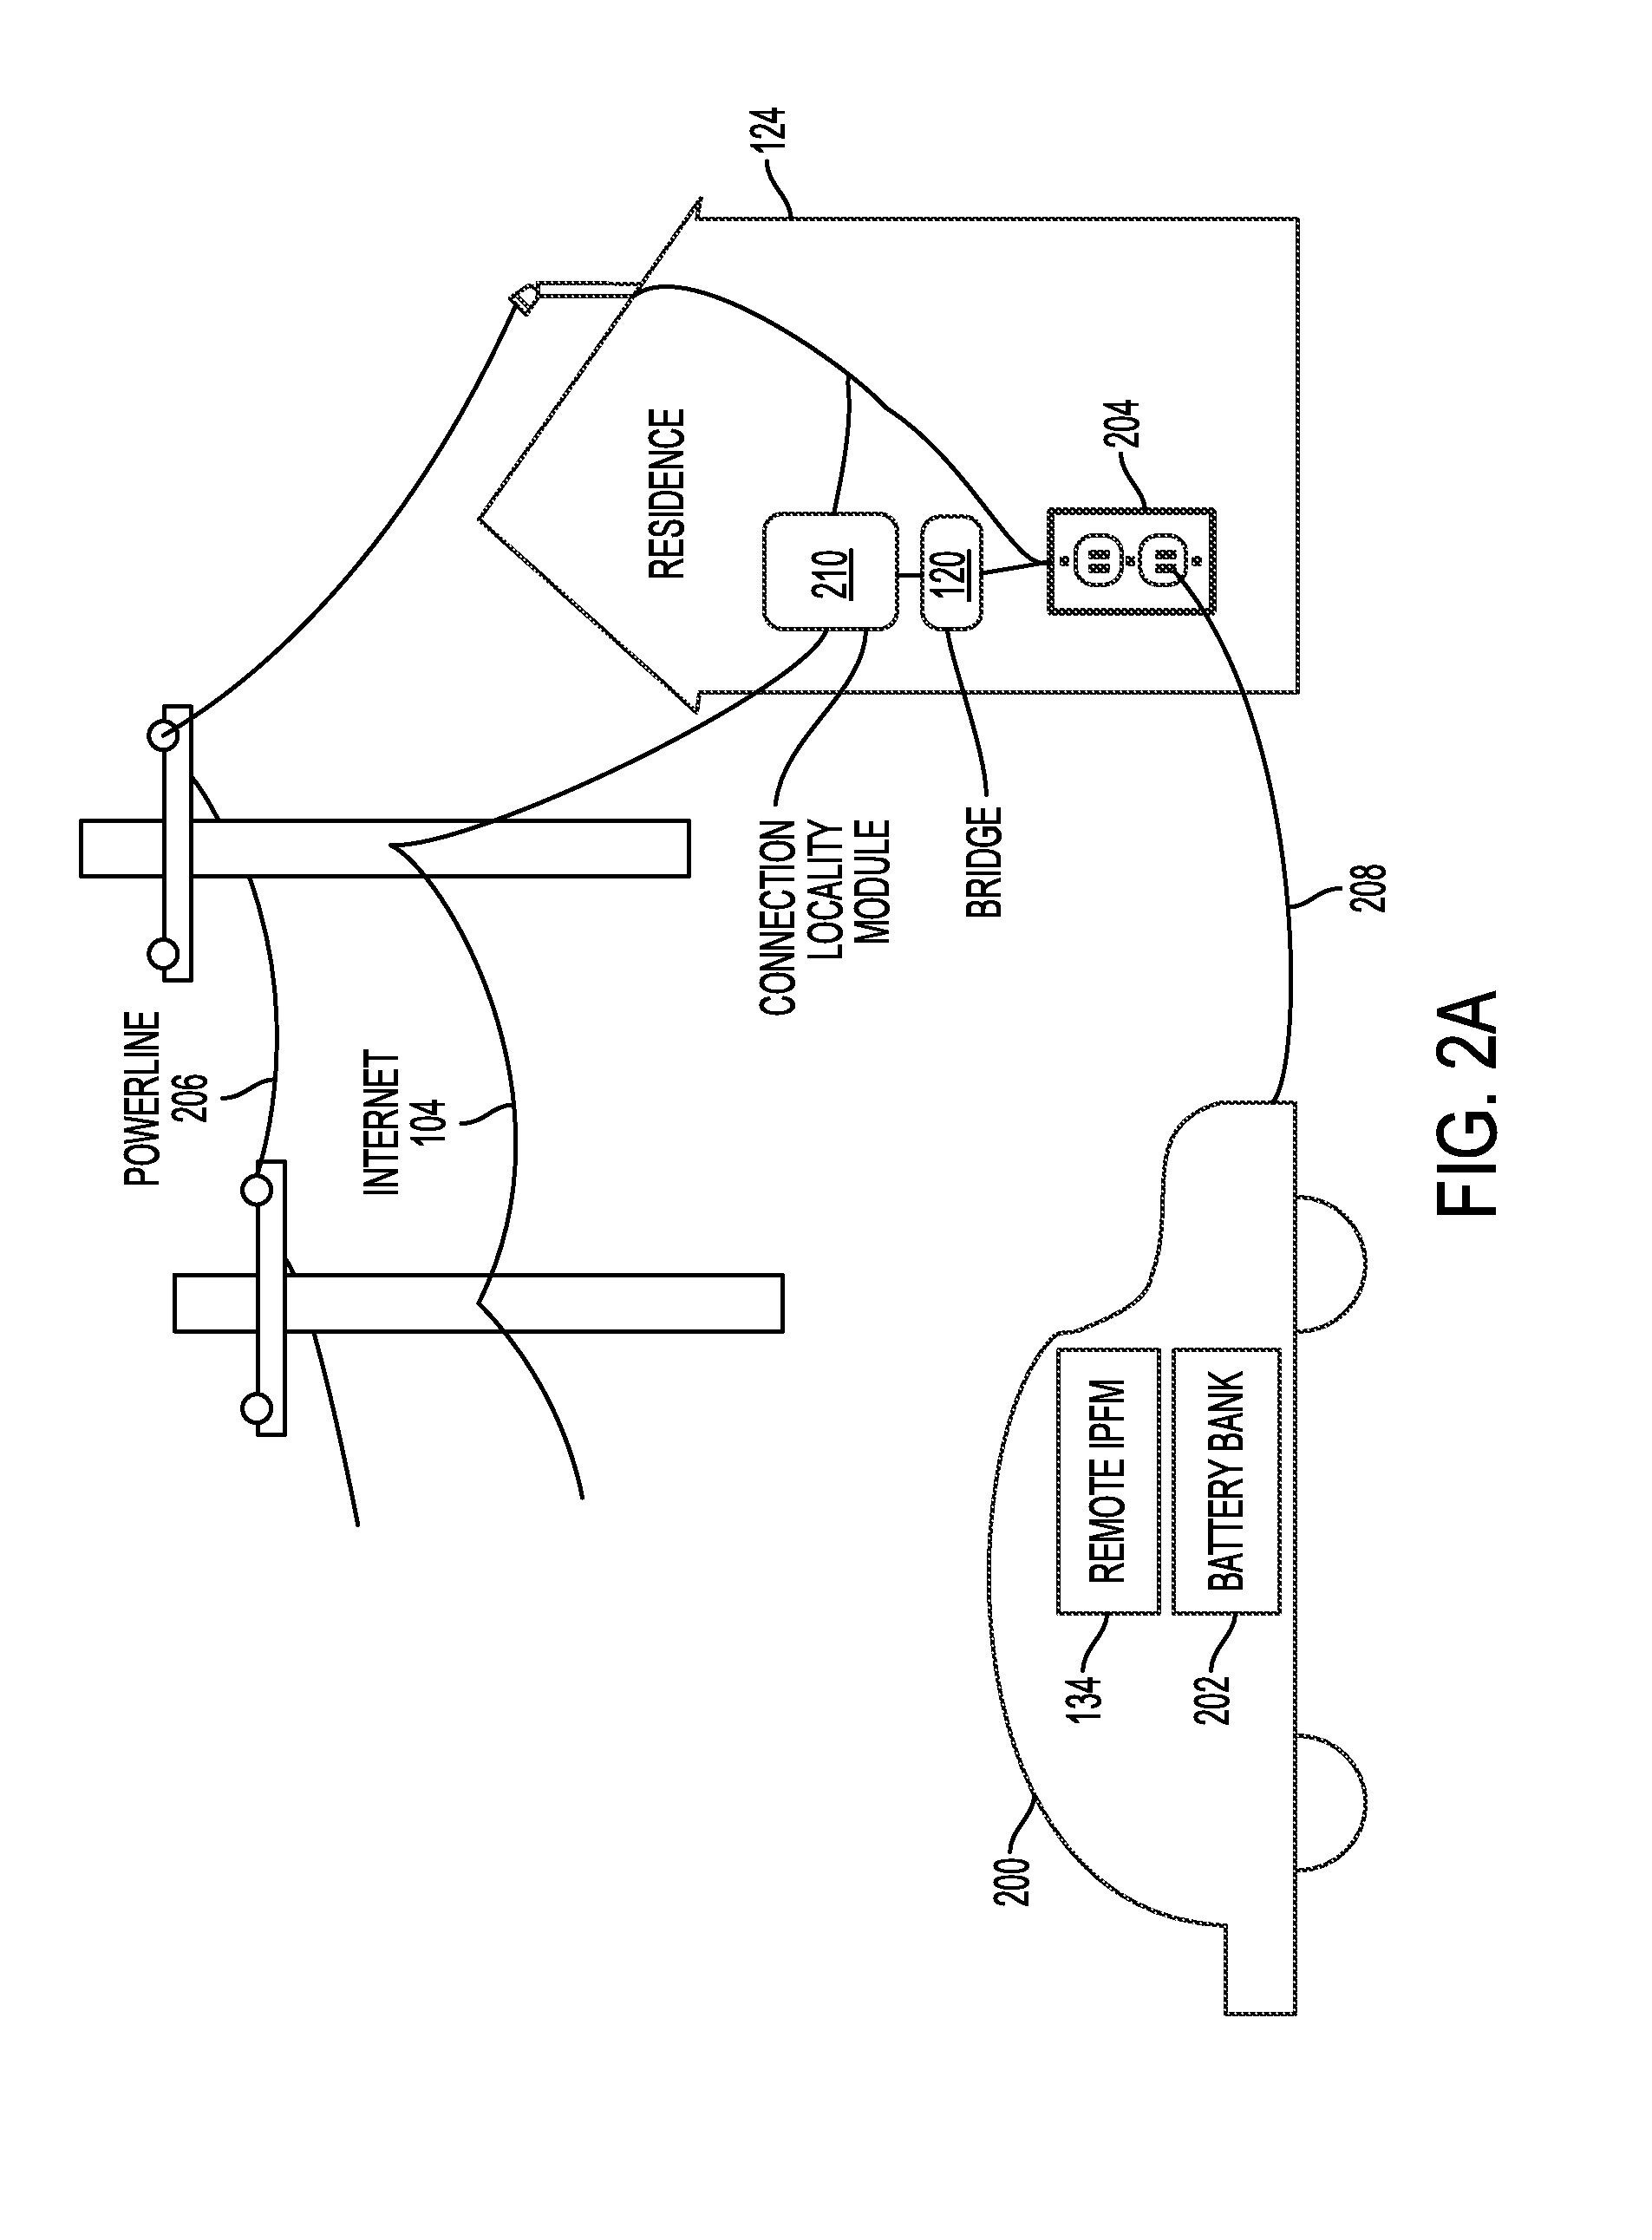 Vehicle communication systems and methods for electric vehicle power management